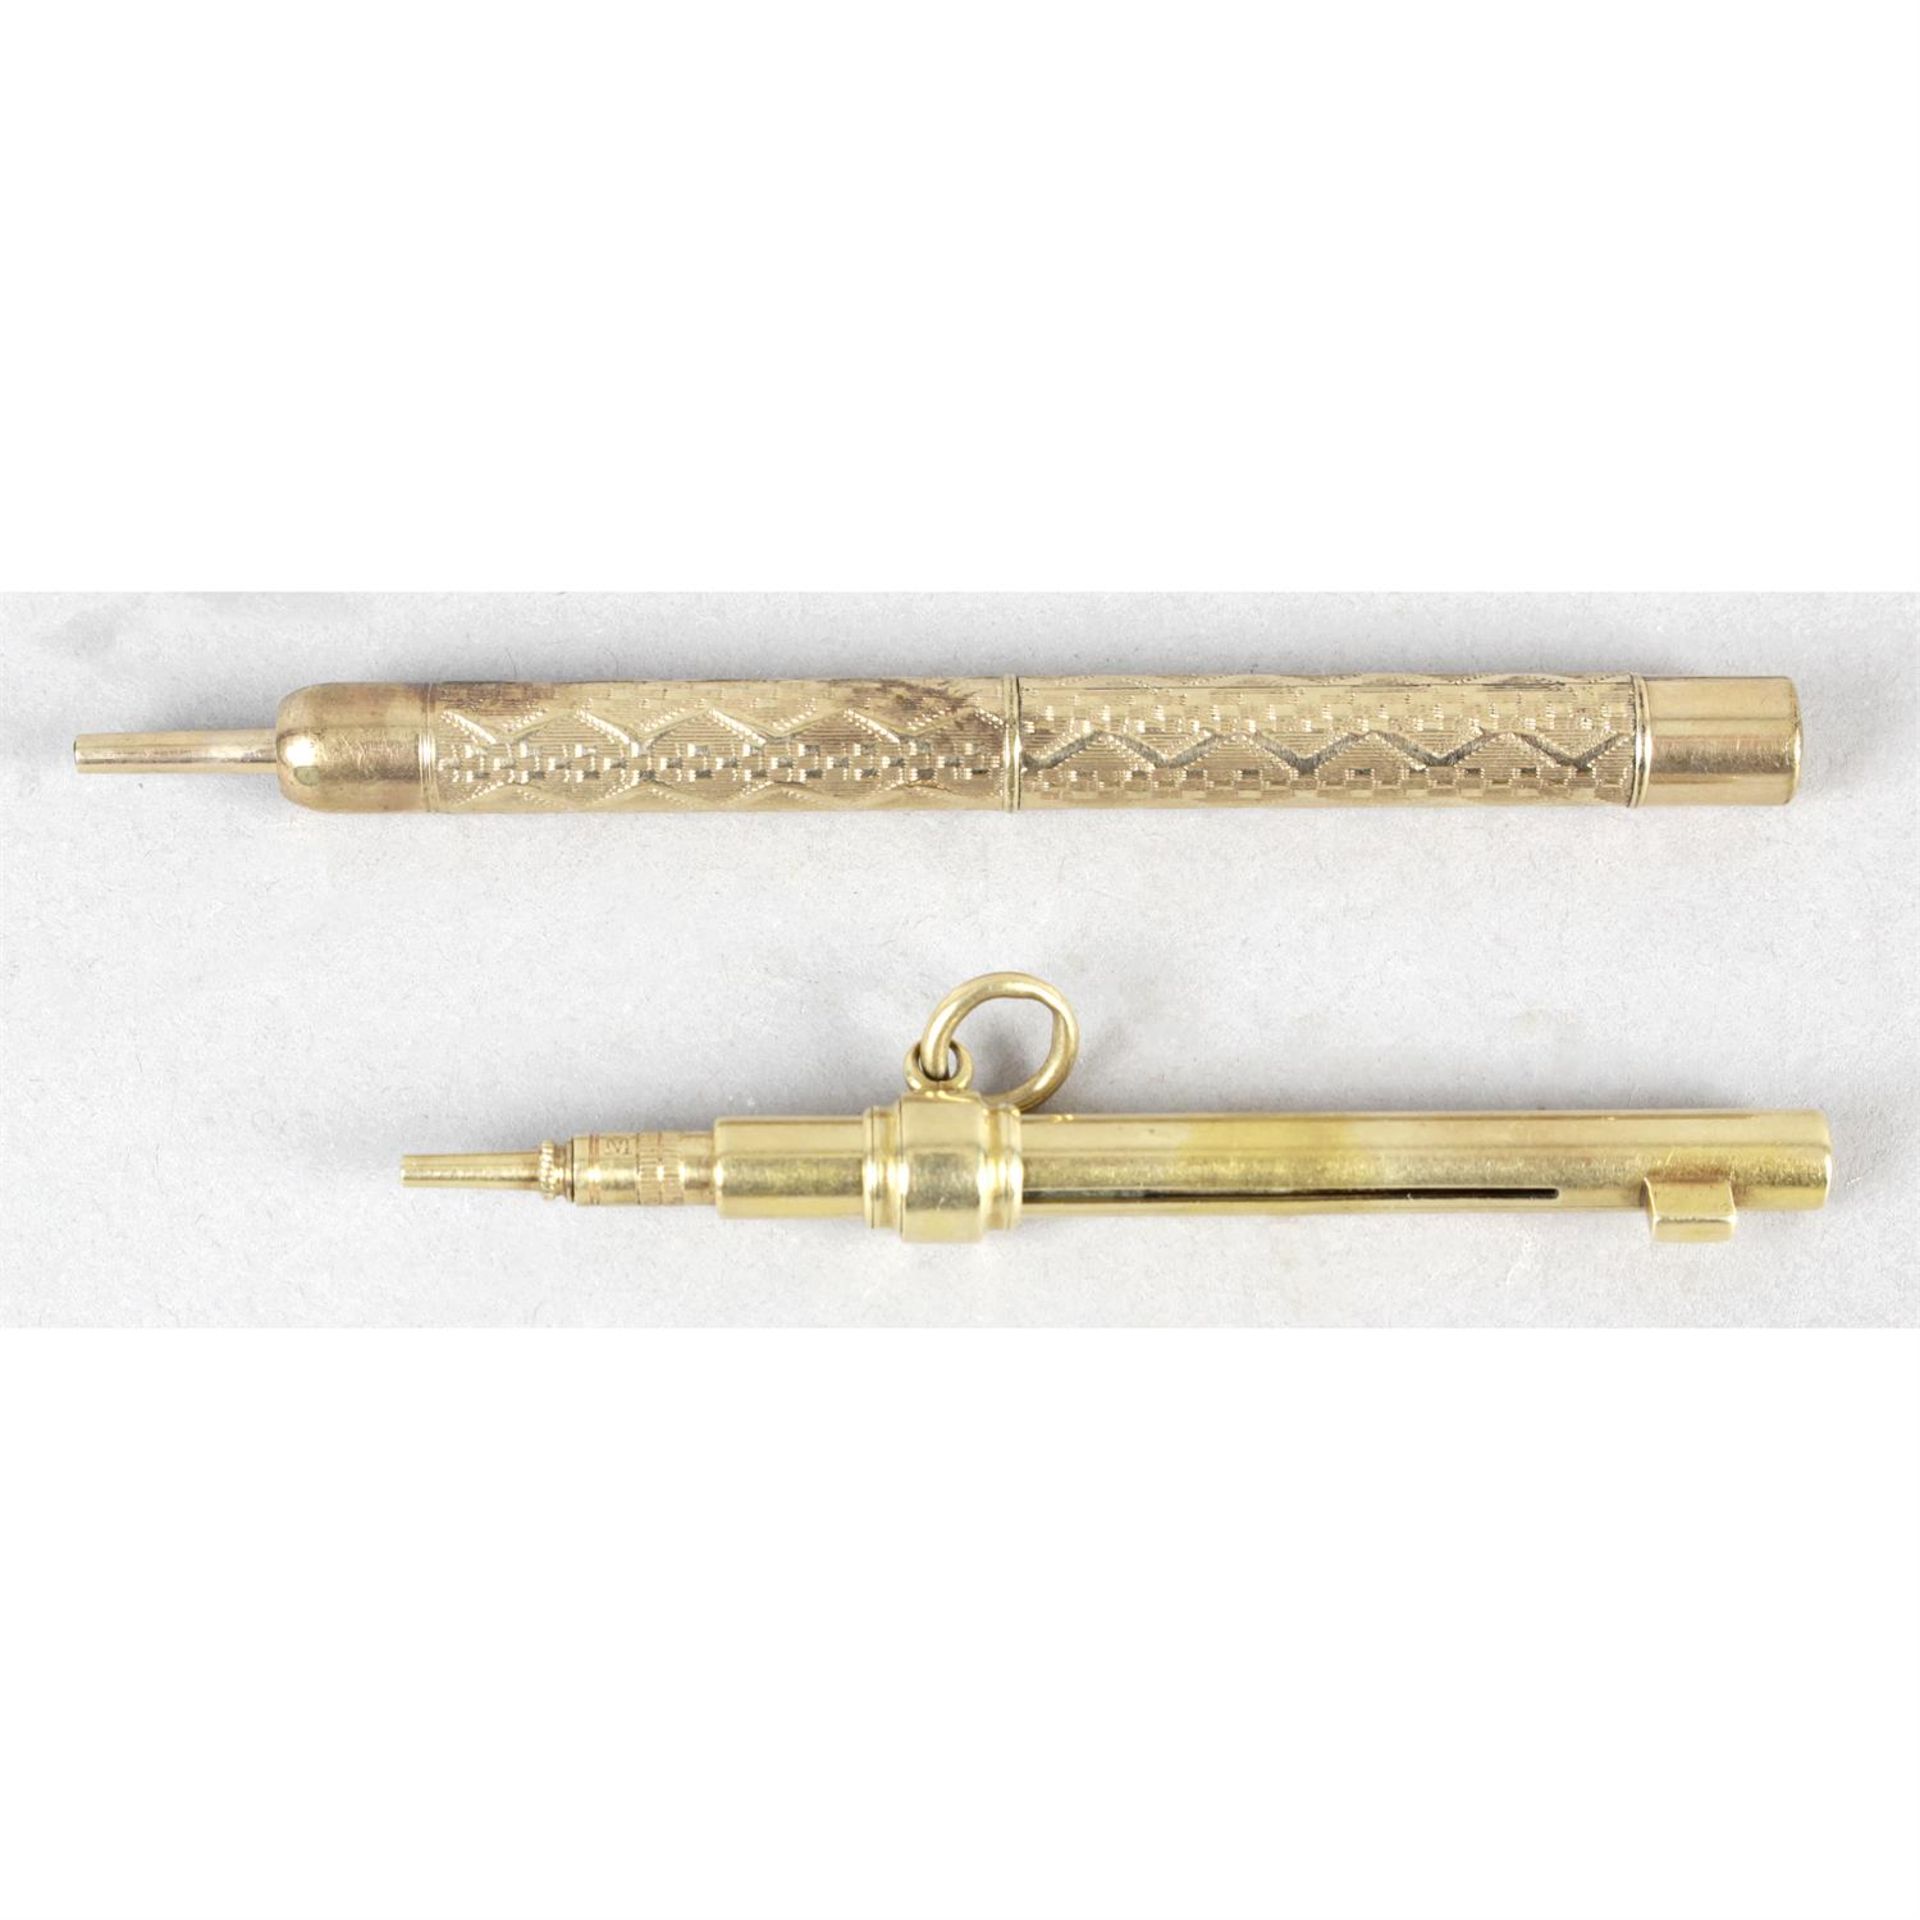 An antique twist action propelling pencil.